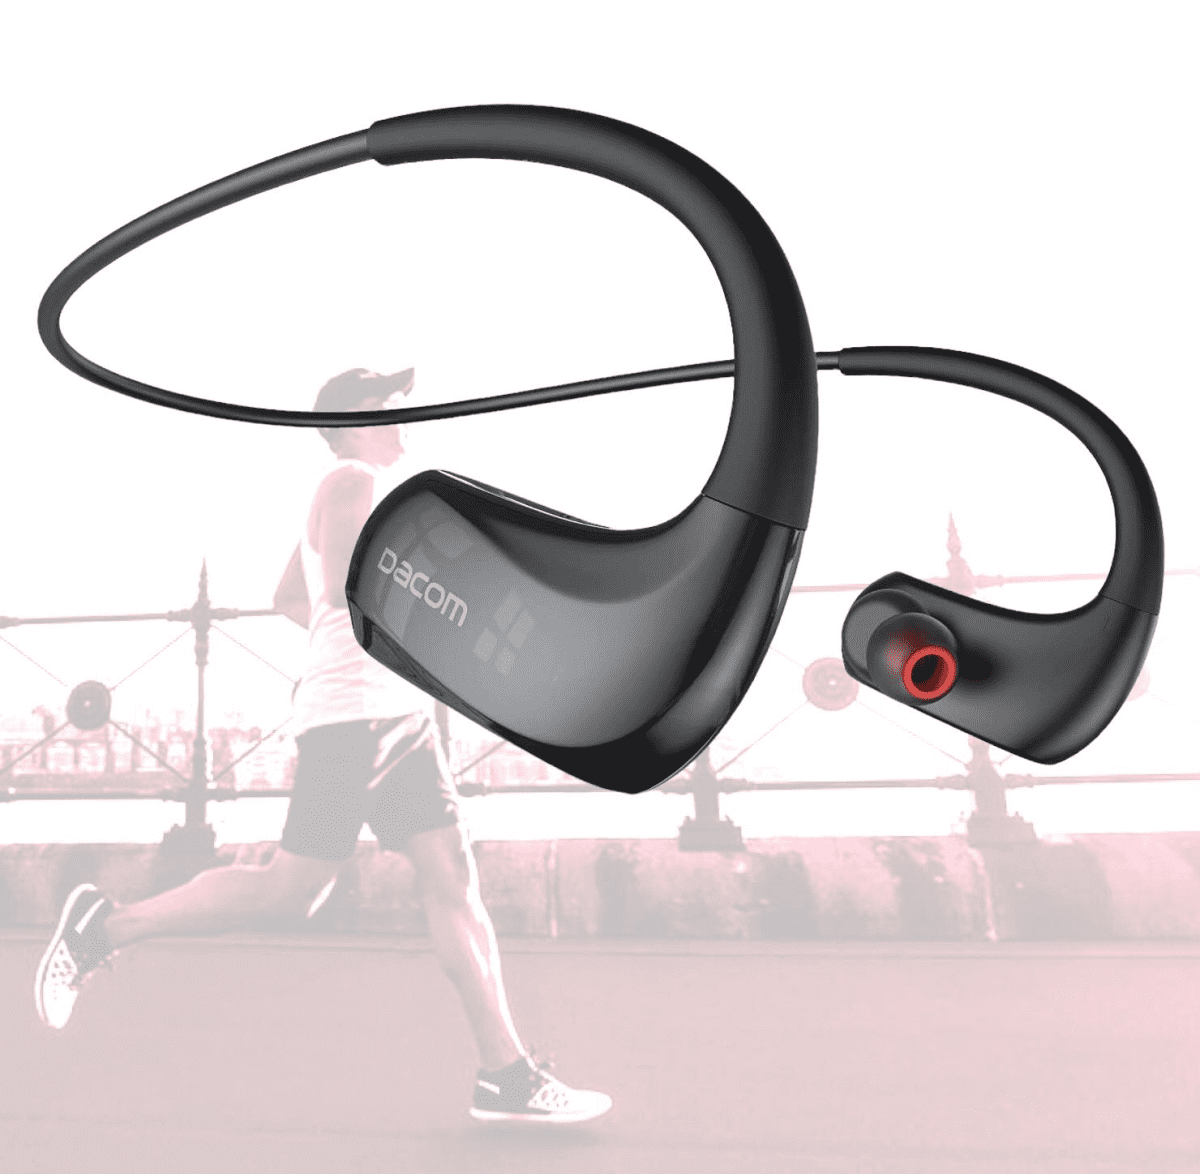 Old-Firm-Boots-Dacom-G93-Bluetooth-In-Ear-Wireless-Sports Running Headphones